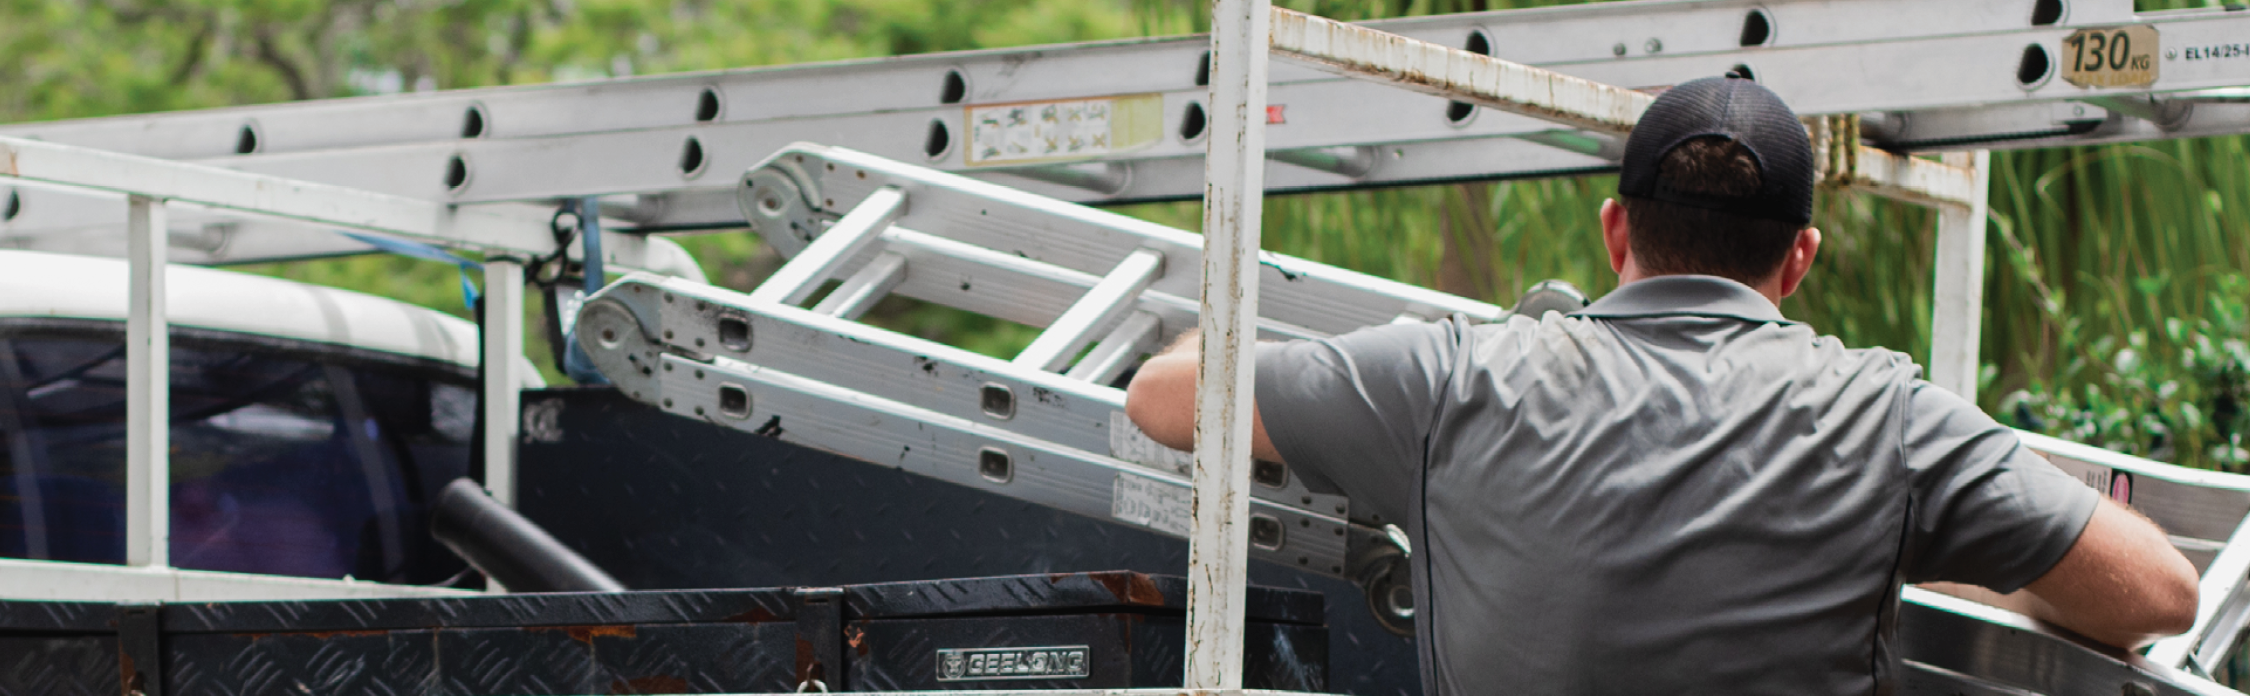 picture of man loading a truck with ladder and white writings "carry the essentials"